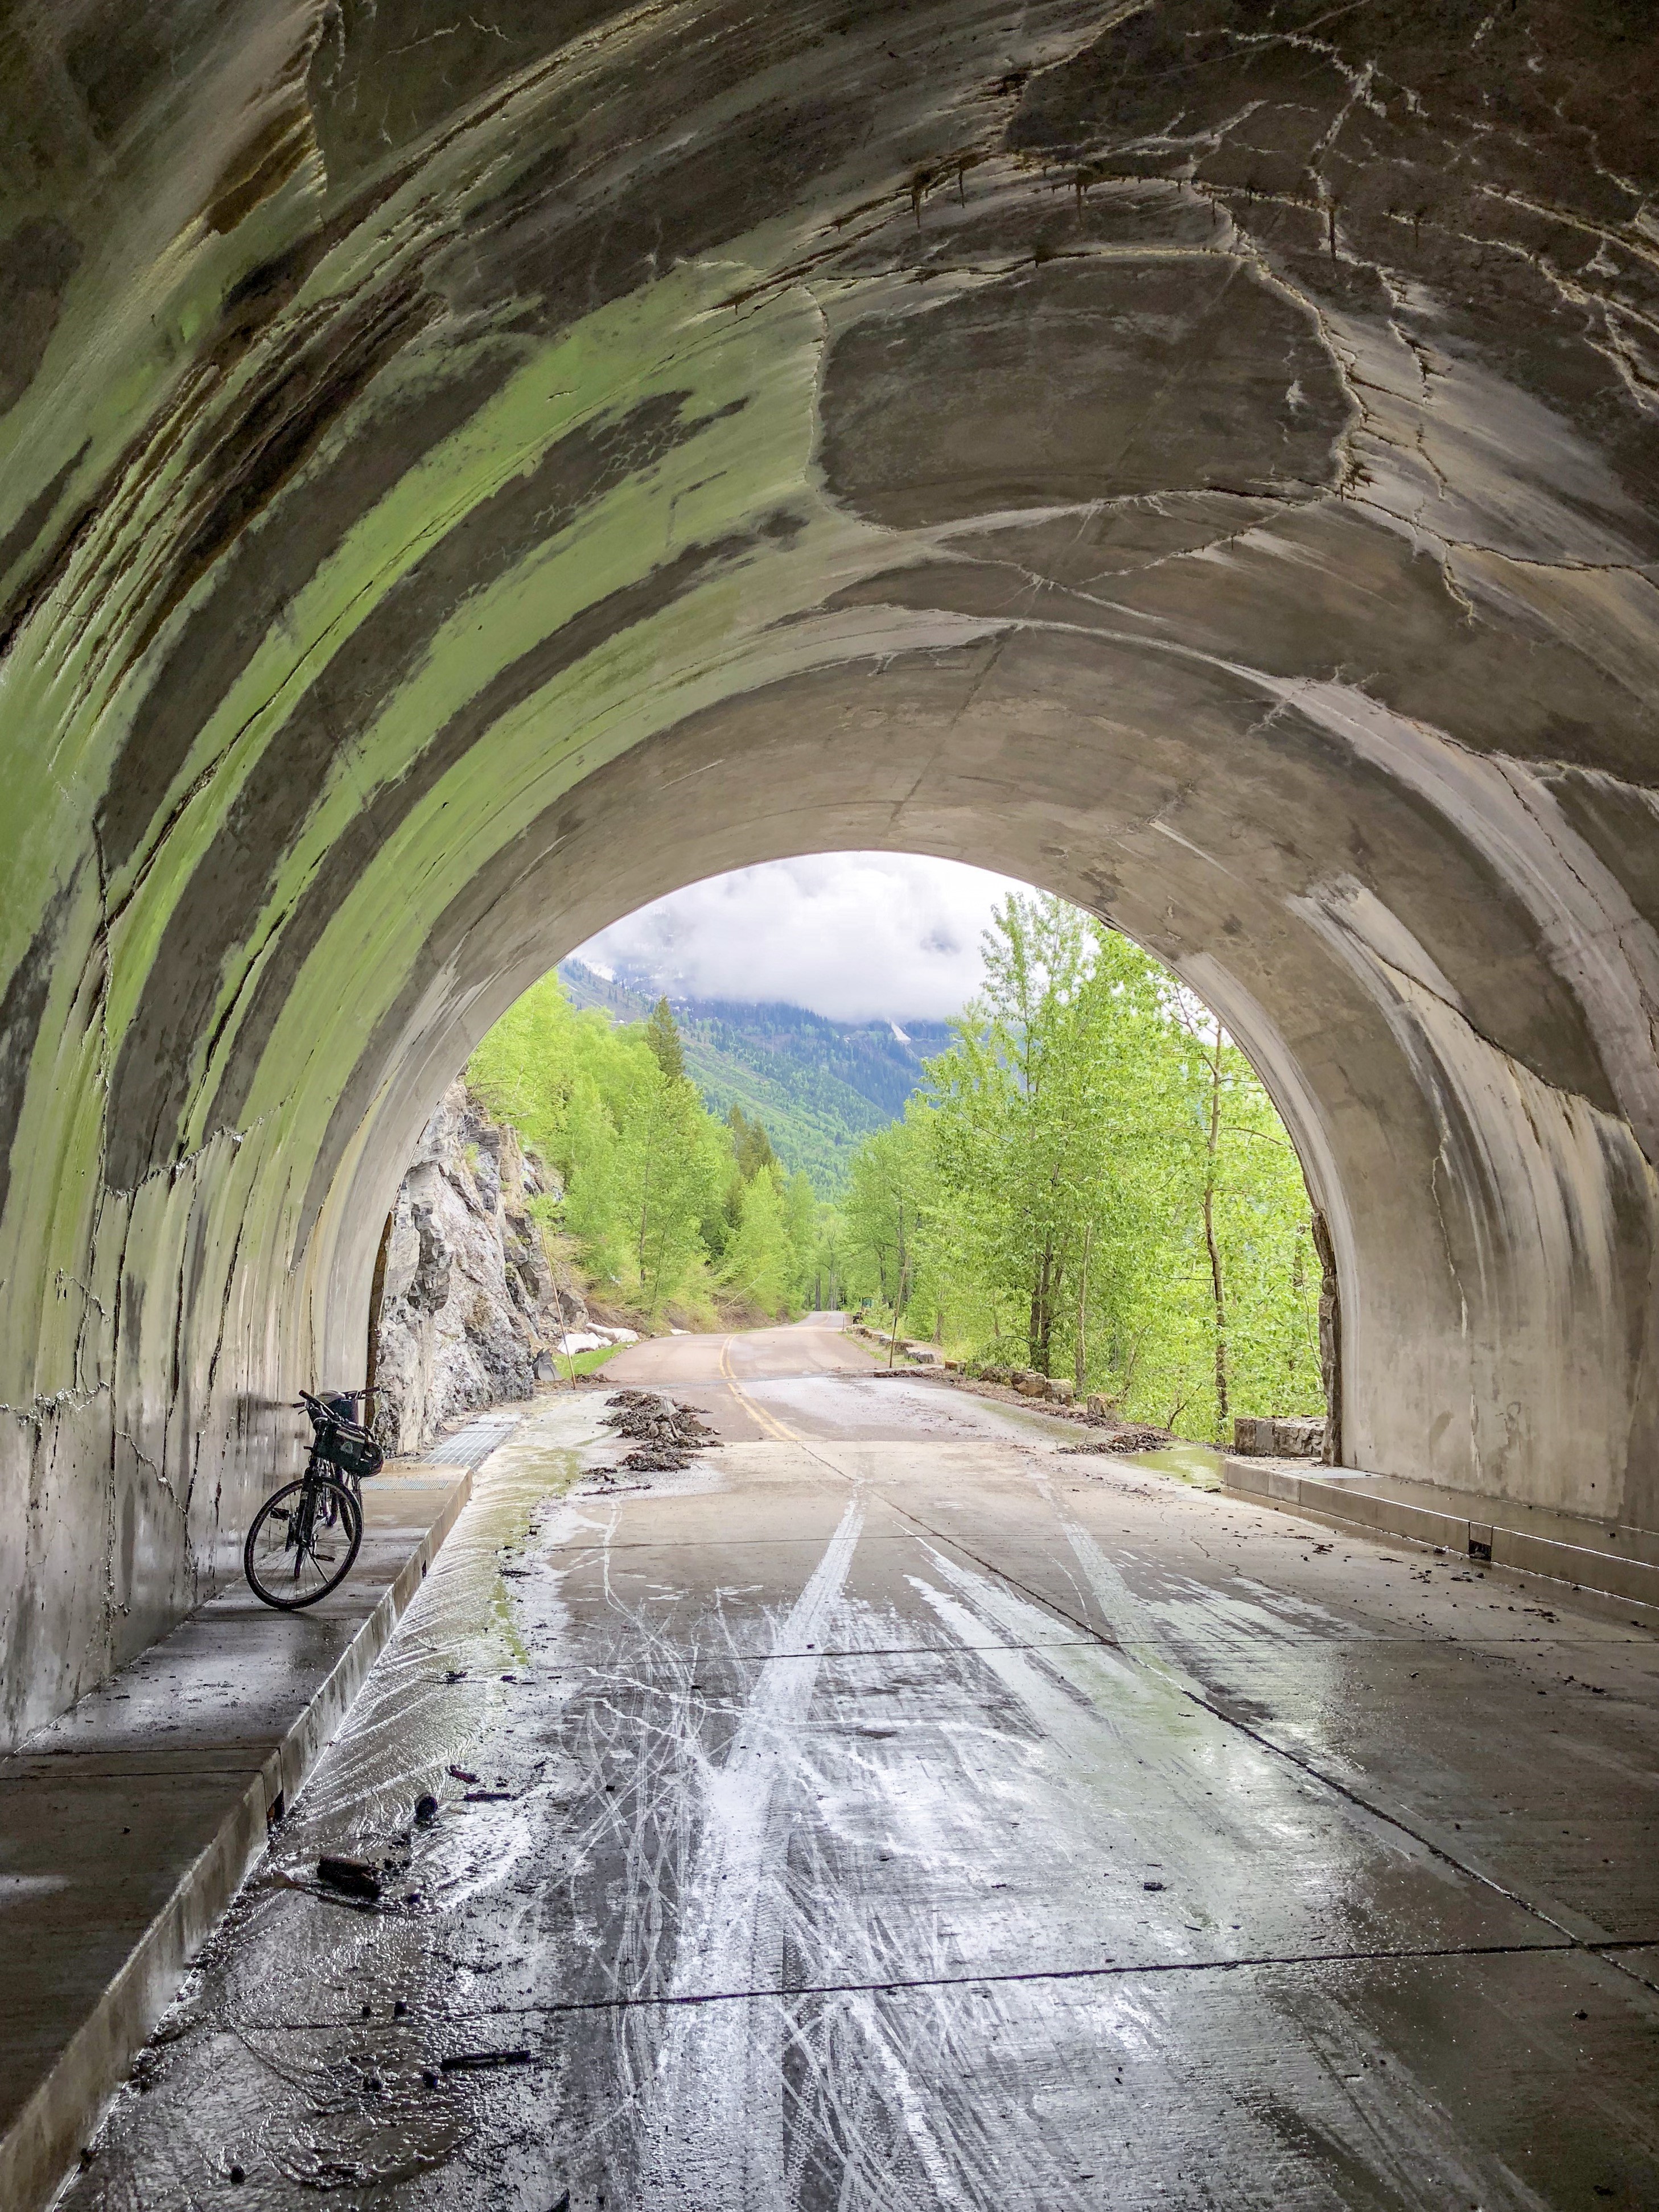 View of Going to the Sun Road in Glacier National Park from a tunnel with a bicycle